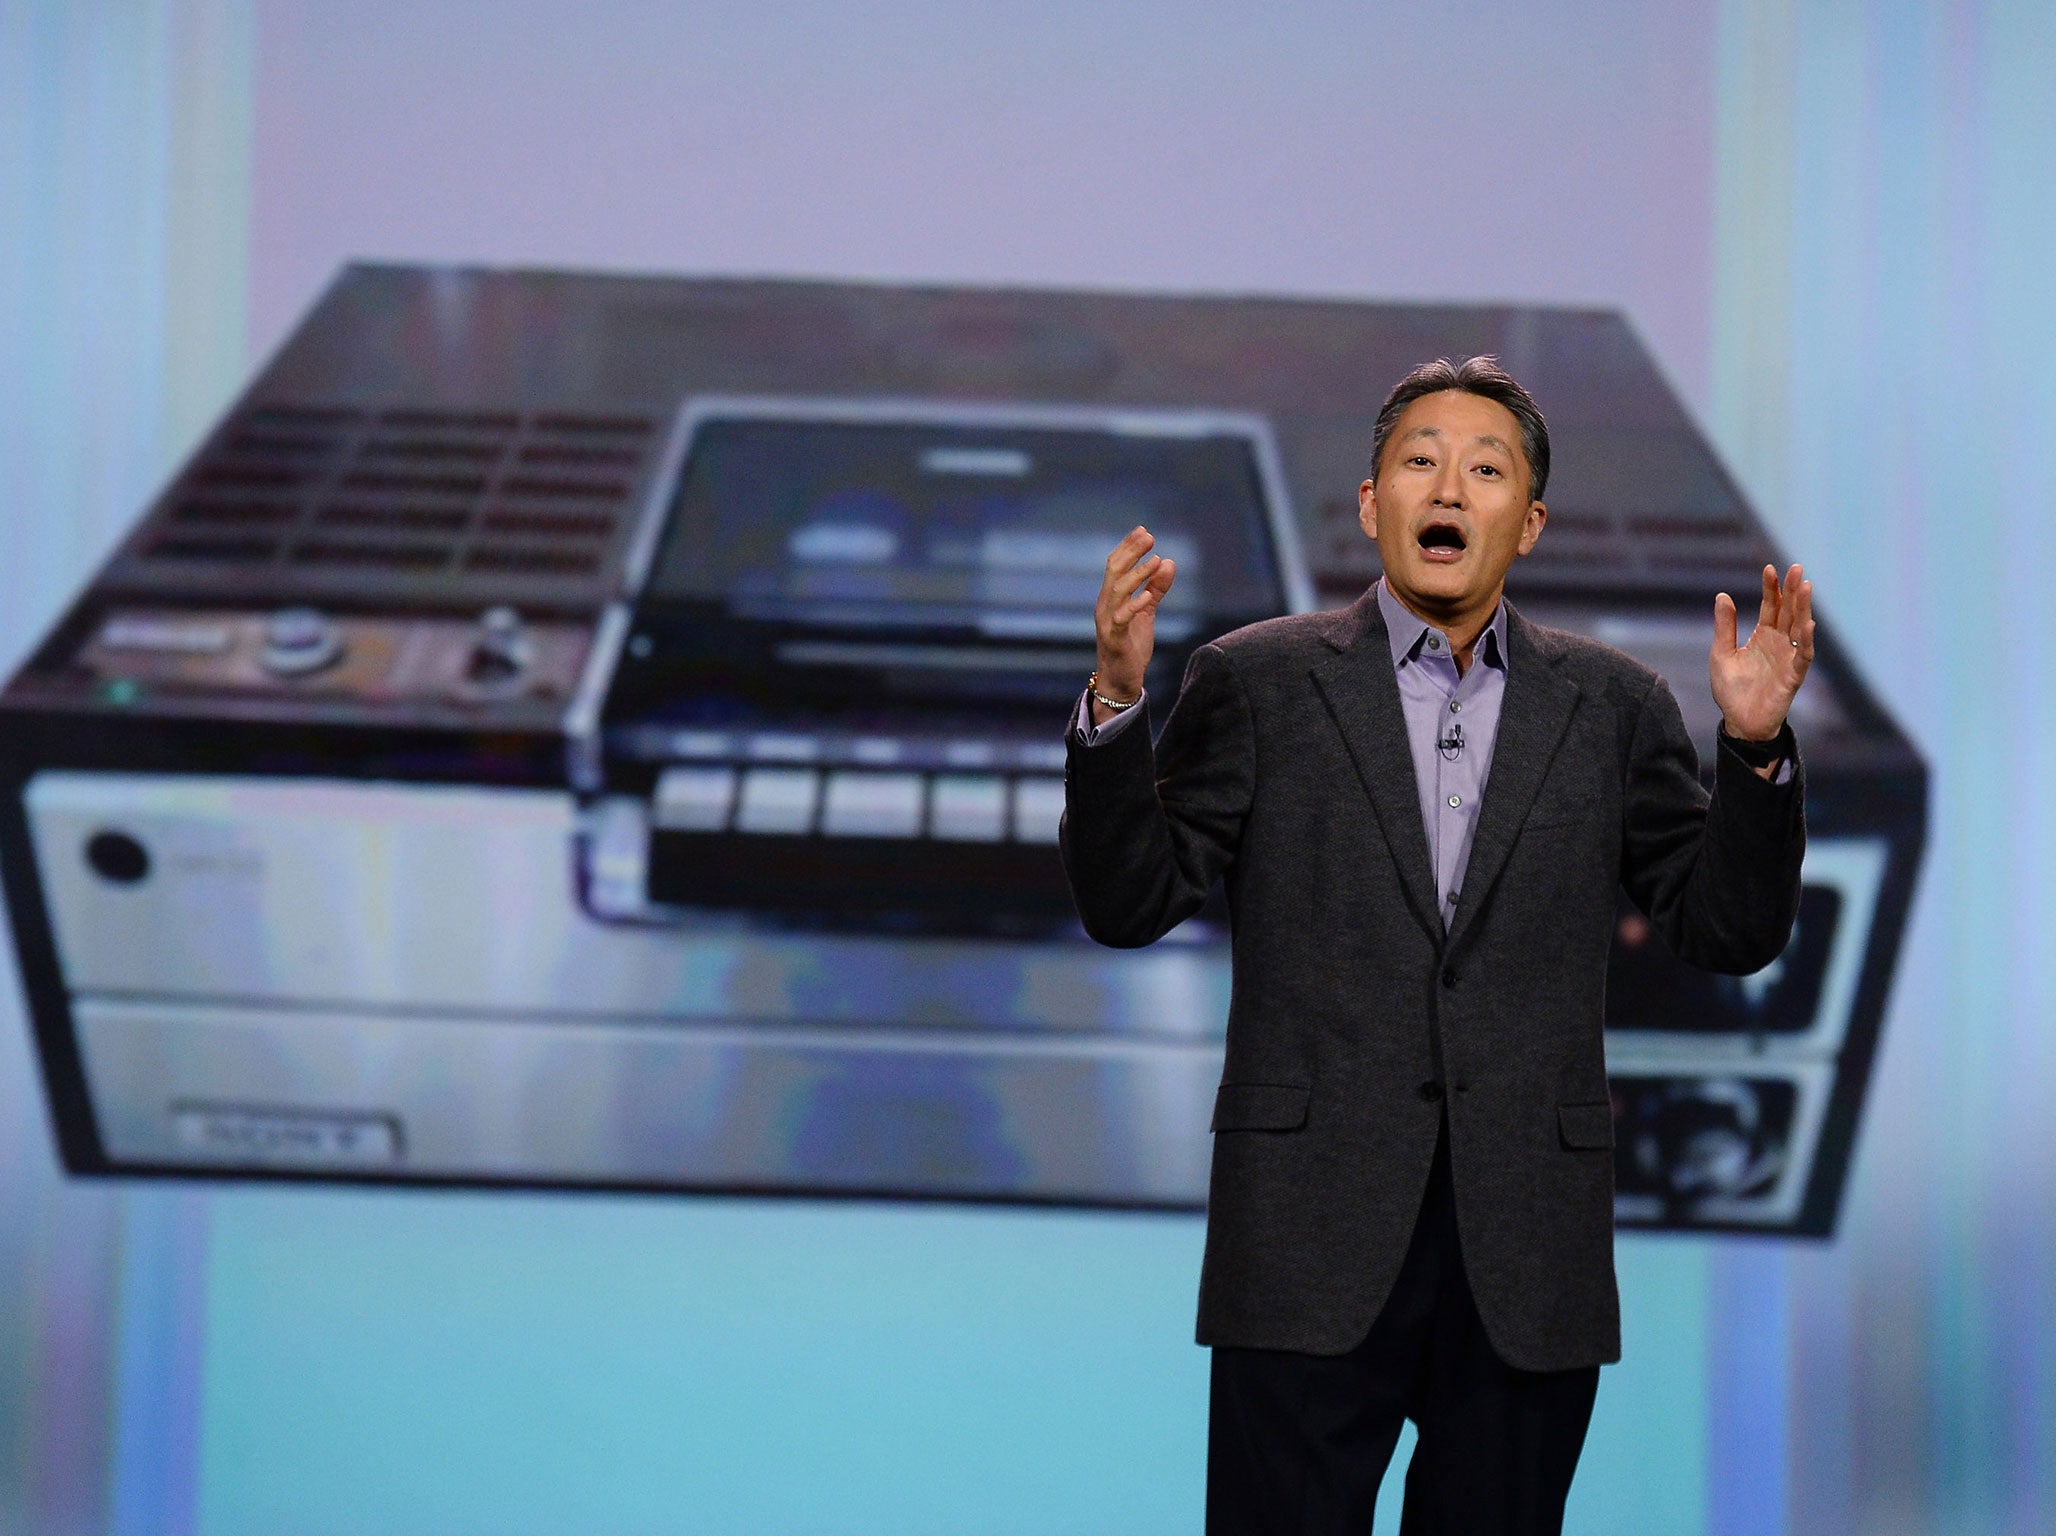 Sony Corp. President and CEO Kazuo Hirai delivers a keynote address in front of an image of a Sony Betamax at the 2014 International CES at The Venetian Las Vegas on January 7, 2014 in Las Vegas, Nevada